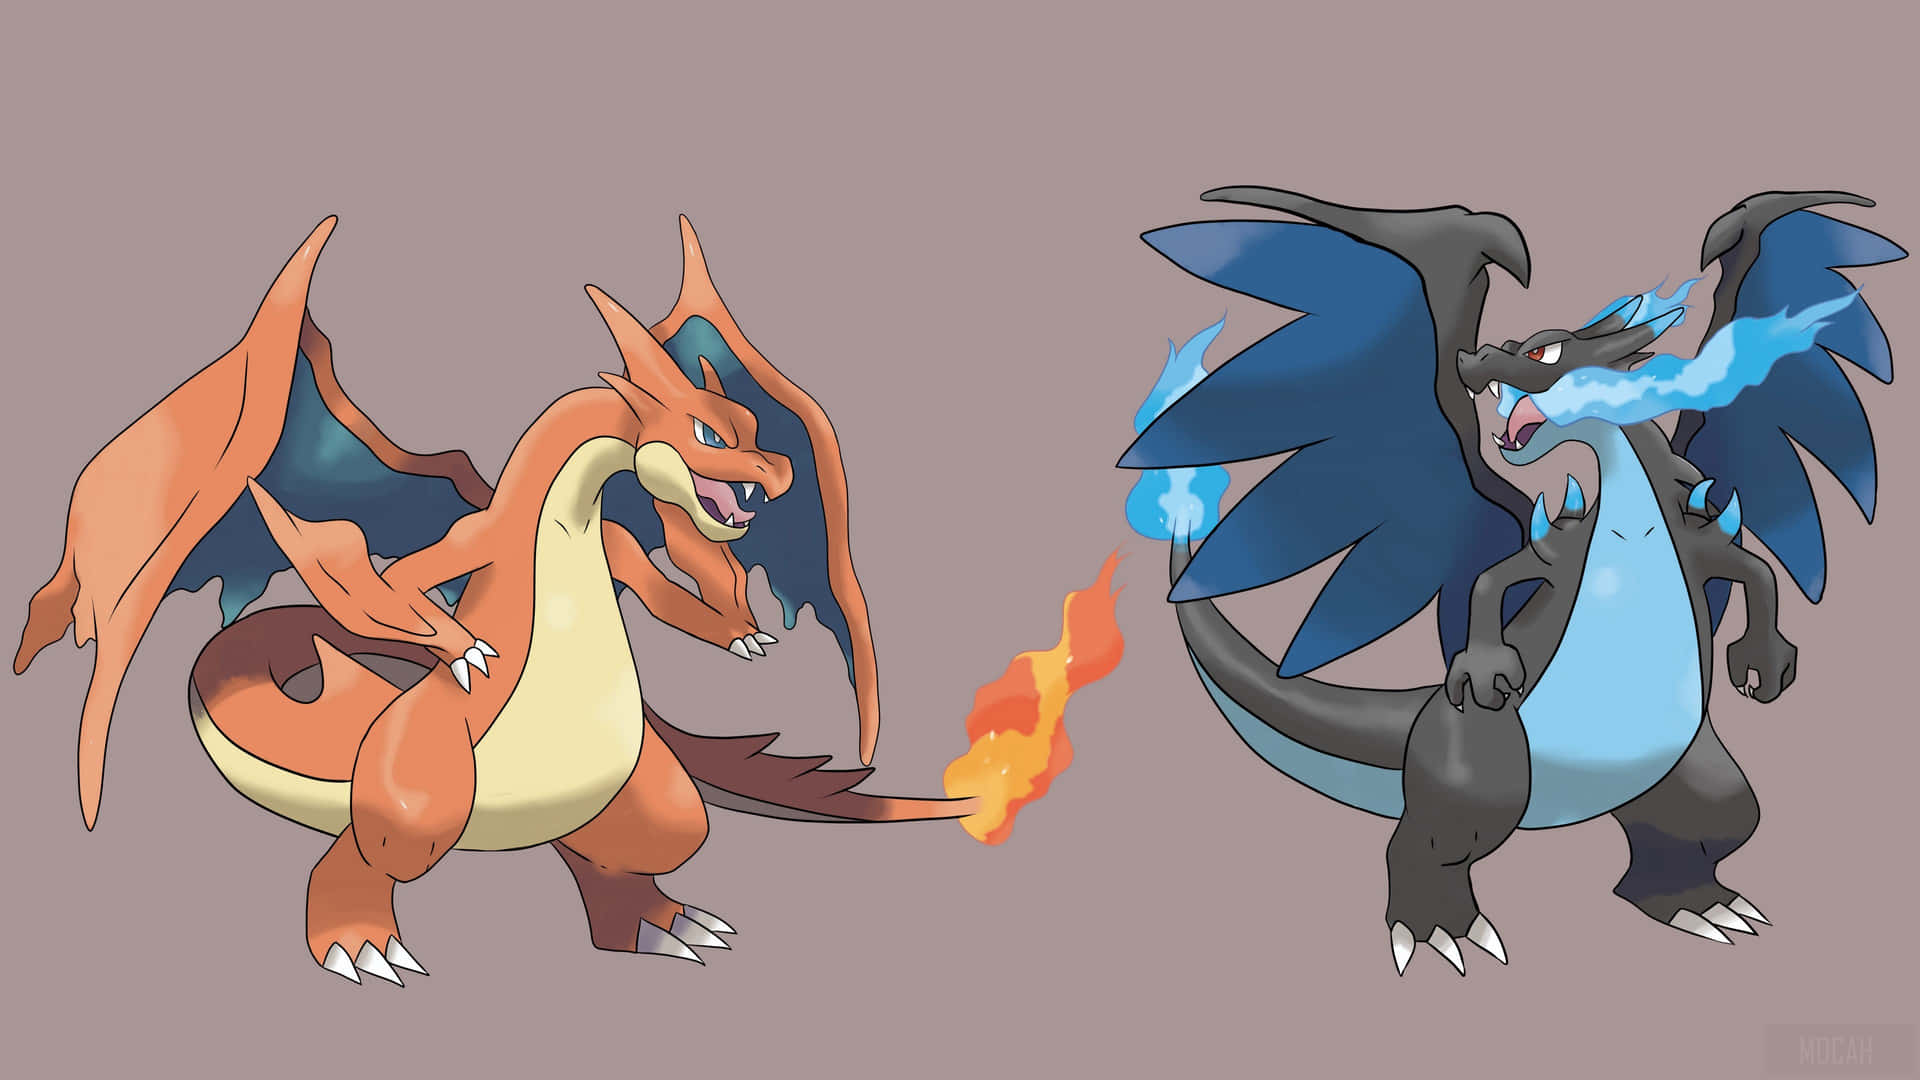 100+] Charizard Pokemon Pictures | Wallpapers.com